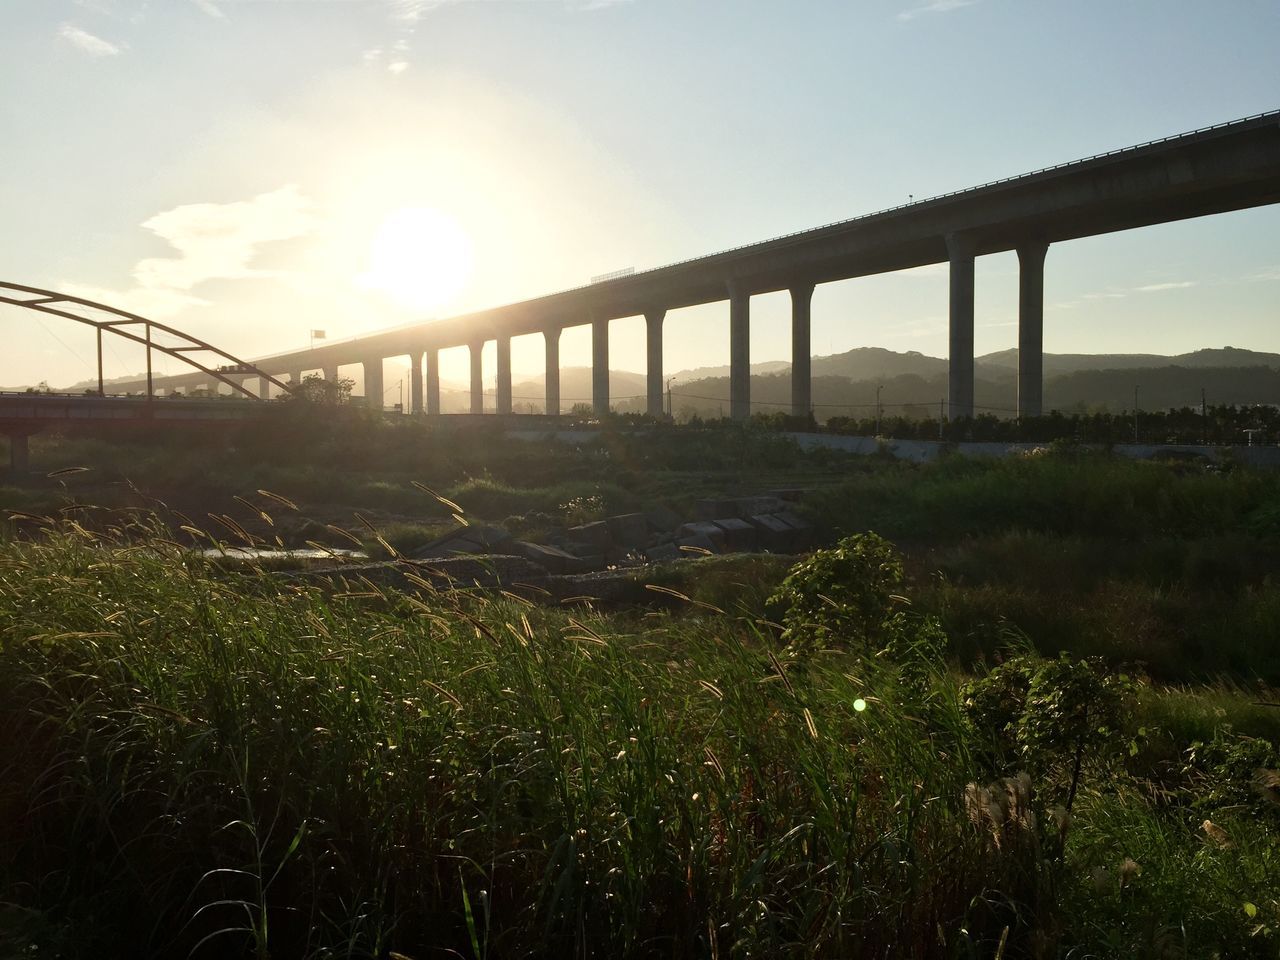 sun, sky, sunlight, connection, field, grass, sunbeam, plant, lens flare, bridge - man made structure, nature, growth, tranquility, fence, sunset, tranquil scene, built structure, beauty in nature, landscape, scenics